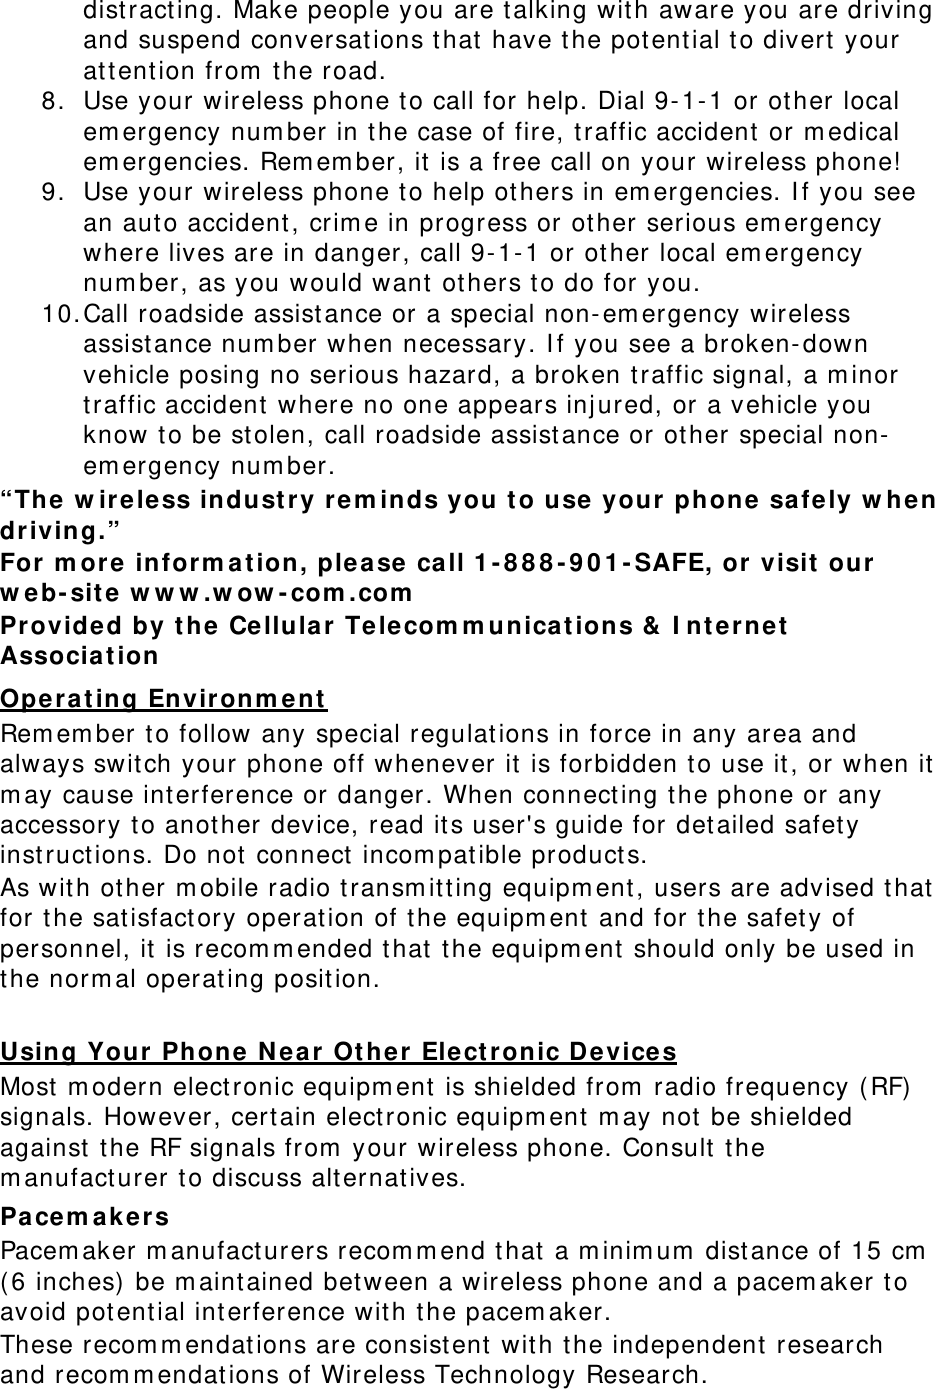 dist ract ing. Make people you are talking wit h aware you are driving and suspend conversat ions t hat have t he potent ial to divert  your at tention from  t he road. 8. Use your wireless phone to call for help. Dial 9- 1- 1 or ot her local em ergency num ber in the case of fire, t raffic accident  or m edical em ergencies. Rem em ber, it is a free call on your wireless phone! 9. Use your wireless phone t o help ot hers in em ergencies. I f you see an aut o accident , crim e in progress or other serious em ergency where lives are in danger, call 9- 1- 1 or other local em ergency num ber, as you would want ot hers t o do for you. 10. Call roadside assist ance or a special non- em ergency wireless assist ance num ber when necessary. I f you see a broken- down vehicle posing no serious hazard, a broken t raffic signal, a m inor traffic accident where no one appears inj ured, or a vehicle you know t o be stolen, call roadside assistance or other special non-em ergency num ber. “The w ire le ss indu stry r e m inds you t o use your phone  safe ly  w hen driving.” For m ore  inform a t ion, plea se call 1 - 8 8 8 - 9 0 1 - SAFE, or visit  our w e b- site w w w .w ow - com .com  Provided by t he Cellula r  Telecom m unica tions &amp;  I nt ernet  Associa t ion  Oper a t ing En vironm e nt  Rem em ber t o follow any special regulat ions in force in any area and always swit ch your phone off whenever it is forbidden to use it , or when it  m ay cause int erference or danger. When connect ing t he phone or any accessory to another device, read its user&apos;s guide for det ailed safet y instructions. Do not connect  incom pat ible products. As with other m obile radio t ransm itt ing equipm ent , users are advised that for t he sat isfact ory operat ion of the equipm ent and for the safet y of personnel, it is recom m ended t hat t he equipm ent should only be used in the norm al operating posit ion. Using Your Phone  N ea r  Ot he r  Elect ronic D e vices Most  m odern elect ronic equipm ent is shielded from  radio frequency ( RF) signals. However, cert ain elect ronic equipm ent m ay not be shielded against  t he RF signals from  your wireless phone. Consult t he m anufact urer t o discuss alt ernatives. Pacem a k e r s Pacem aker m anufact urers recom m end t hat a m inim um  dist ance of 15 cm  ( 6 inches)  be m aintained between a wireless phone and a pacem aker t o avoid potential int erference wit h t he pacem aker. These recom m endat ions are consist ent with t he independent  research and recom m endat ions of Wireless Technology Research. 